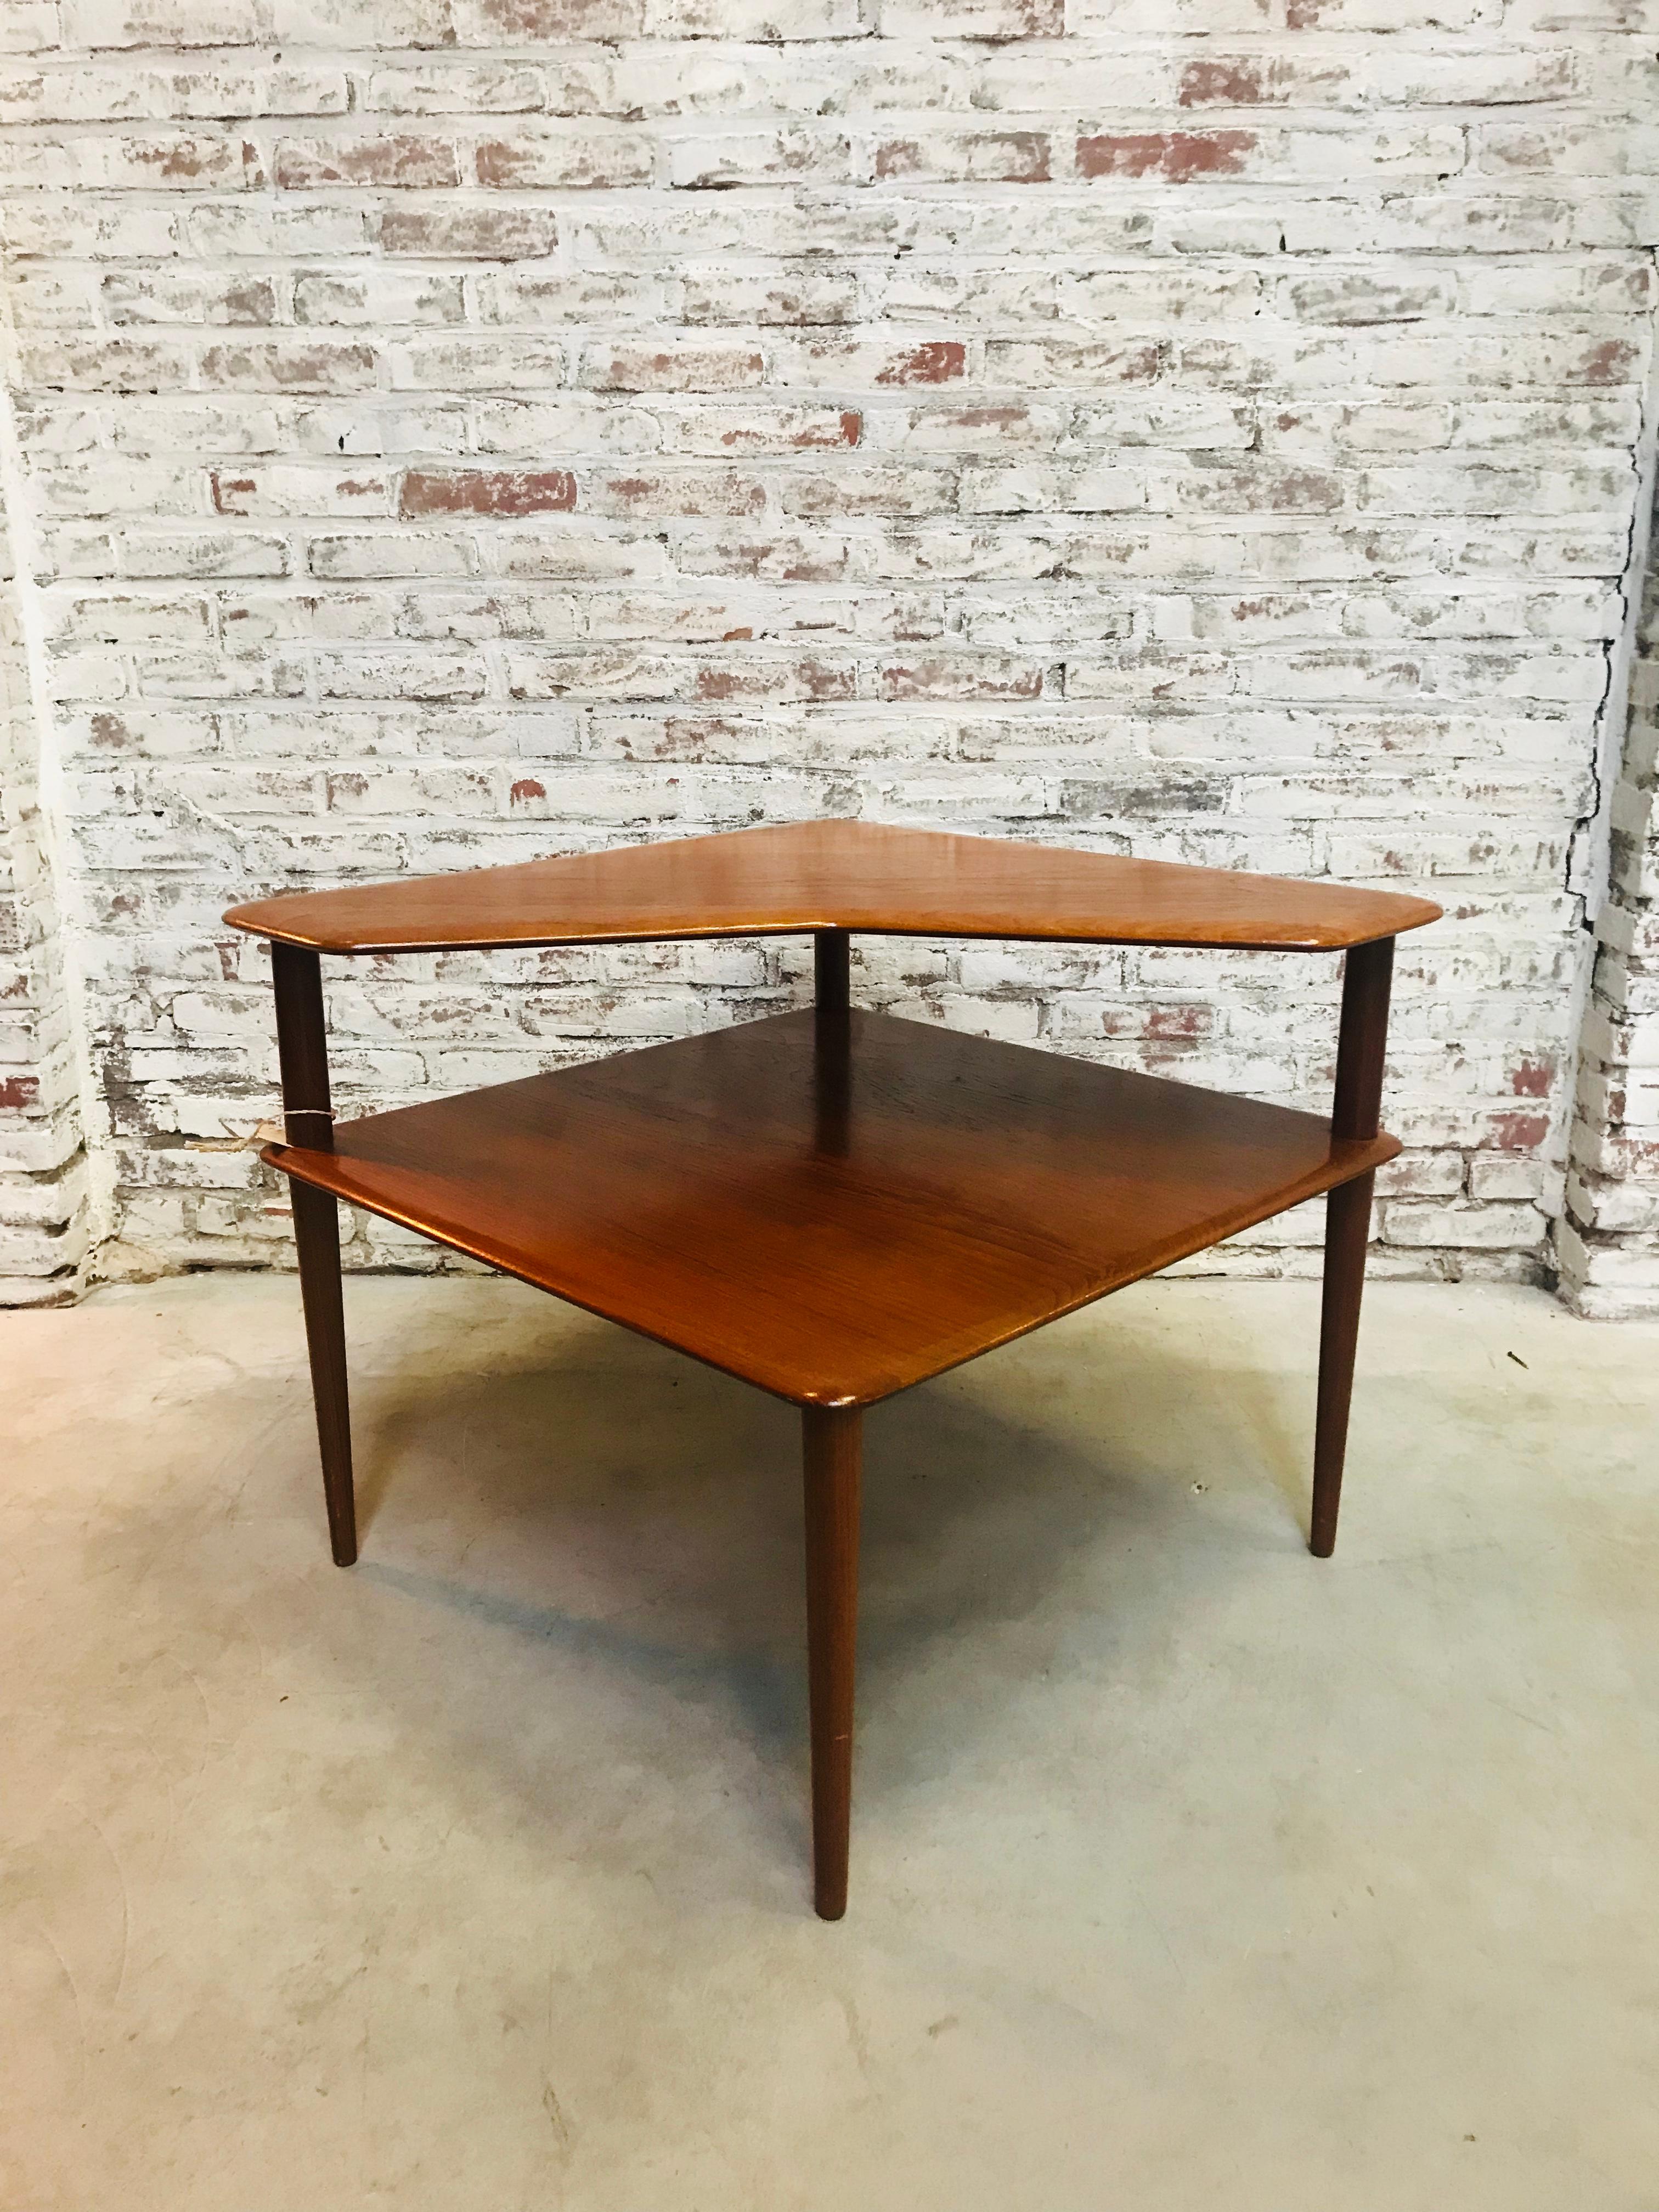 This teak coffee table, in a square shape, was designed by Peter Hvidt & Orla Mølgaard-Nielsen in the sixties. It was manufactured by France & Son and has a solid teak frame. The legs are slightly tapered and the storage compartment has the same